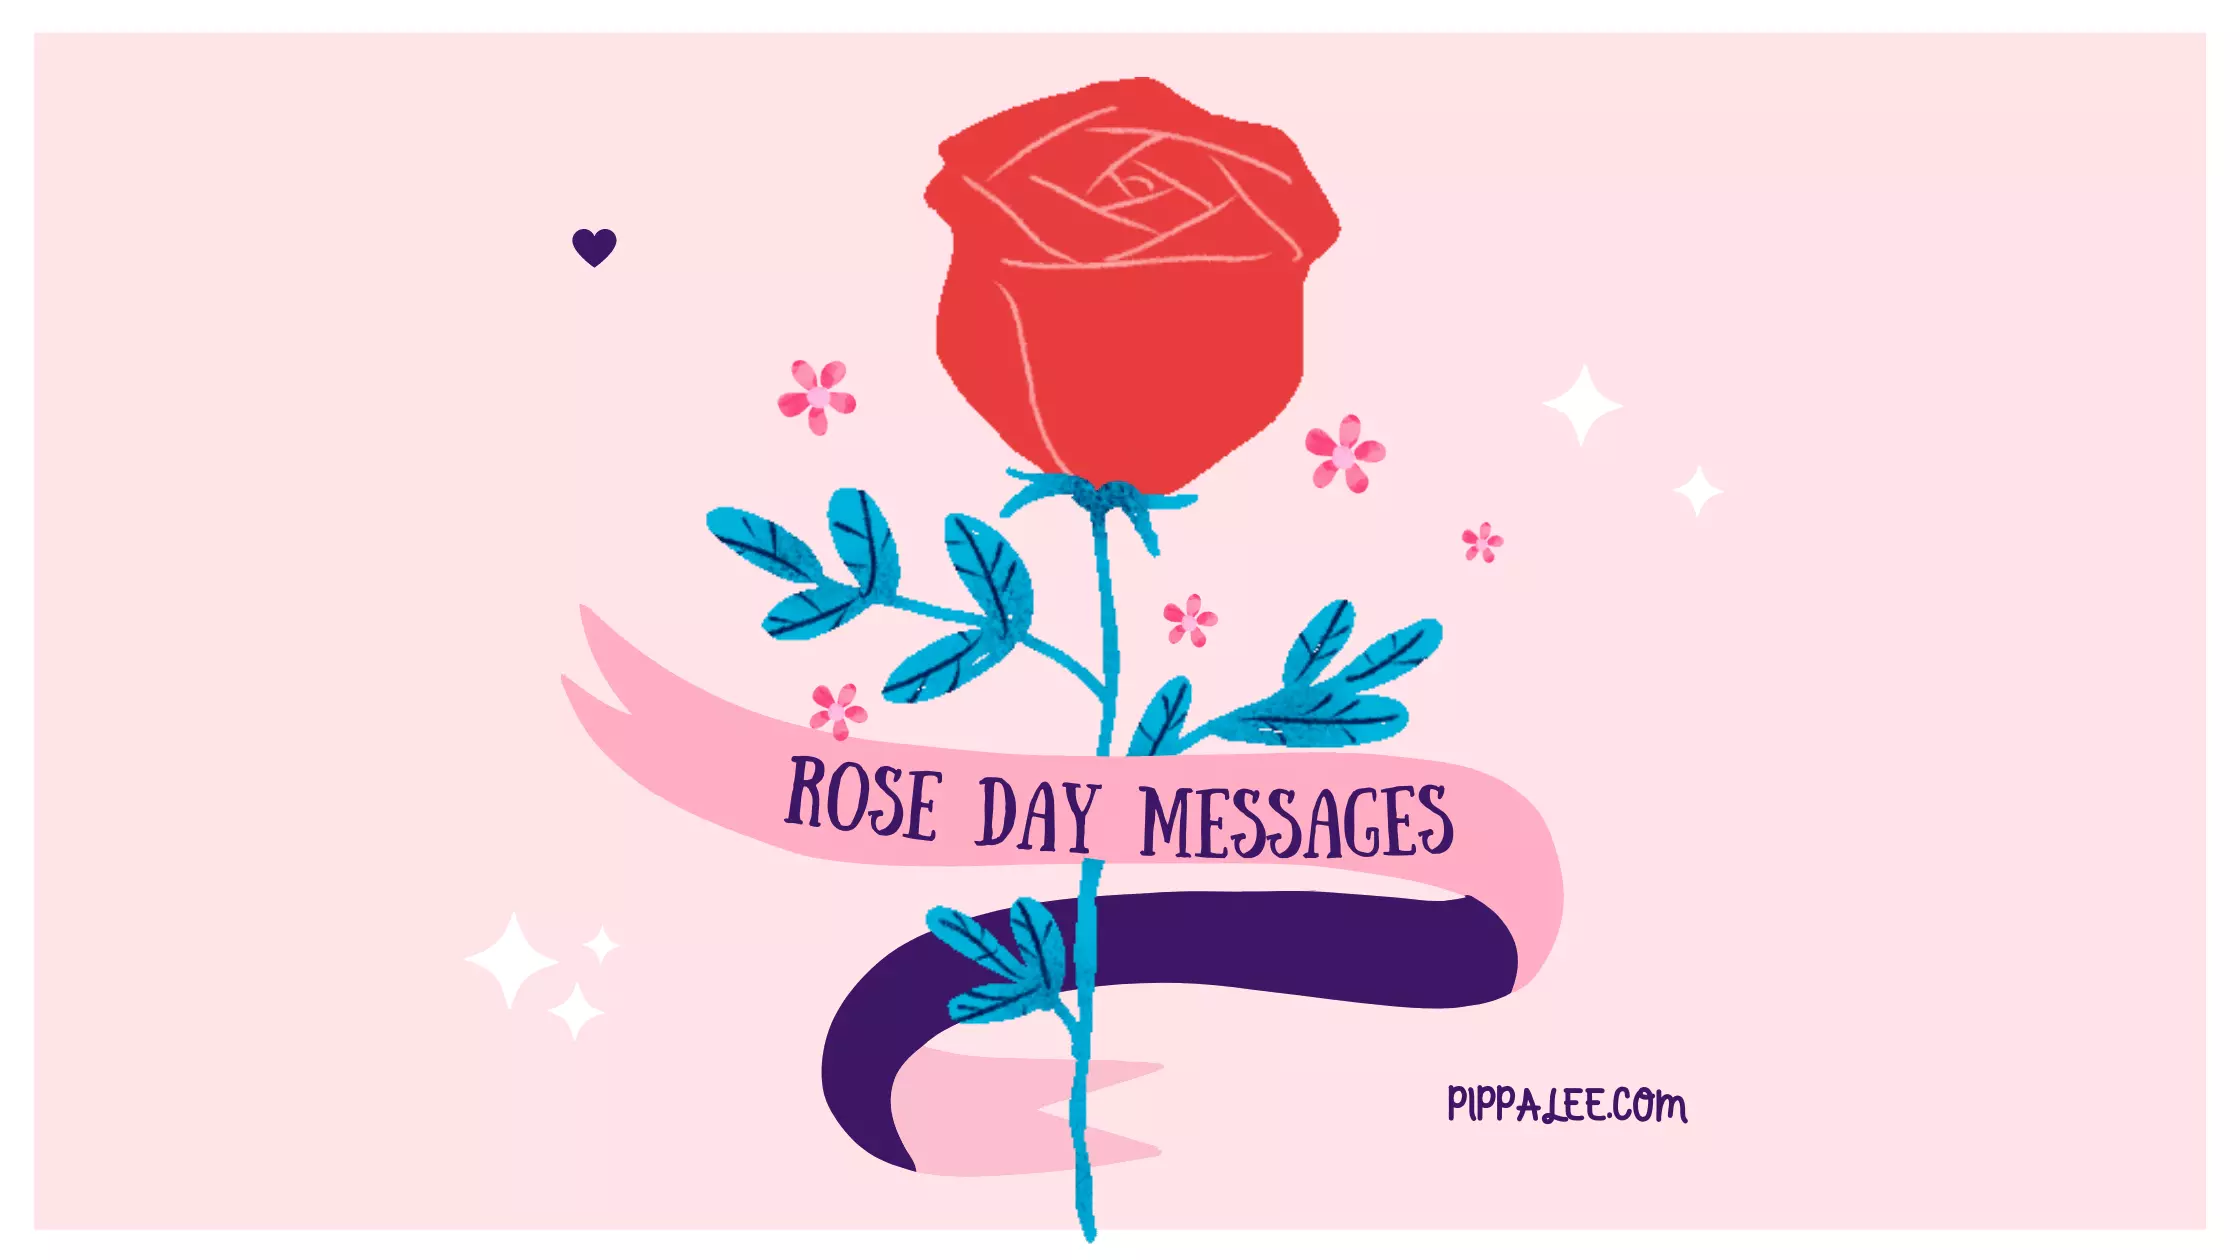 Rose Day Messages - Ultimate List of Wishes